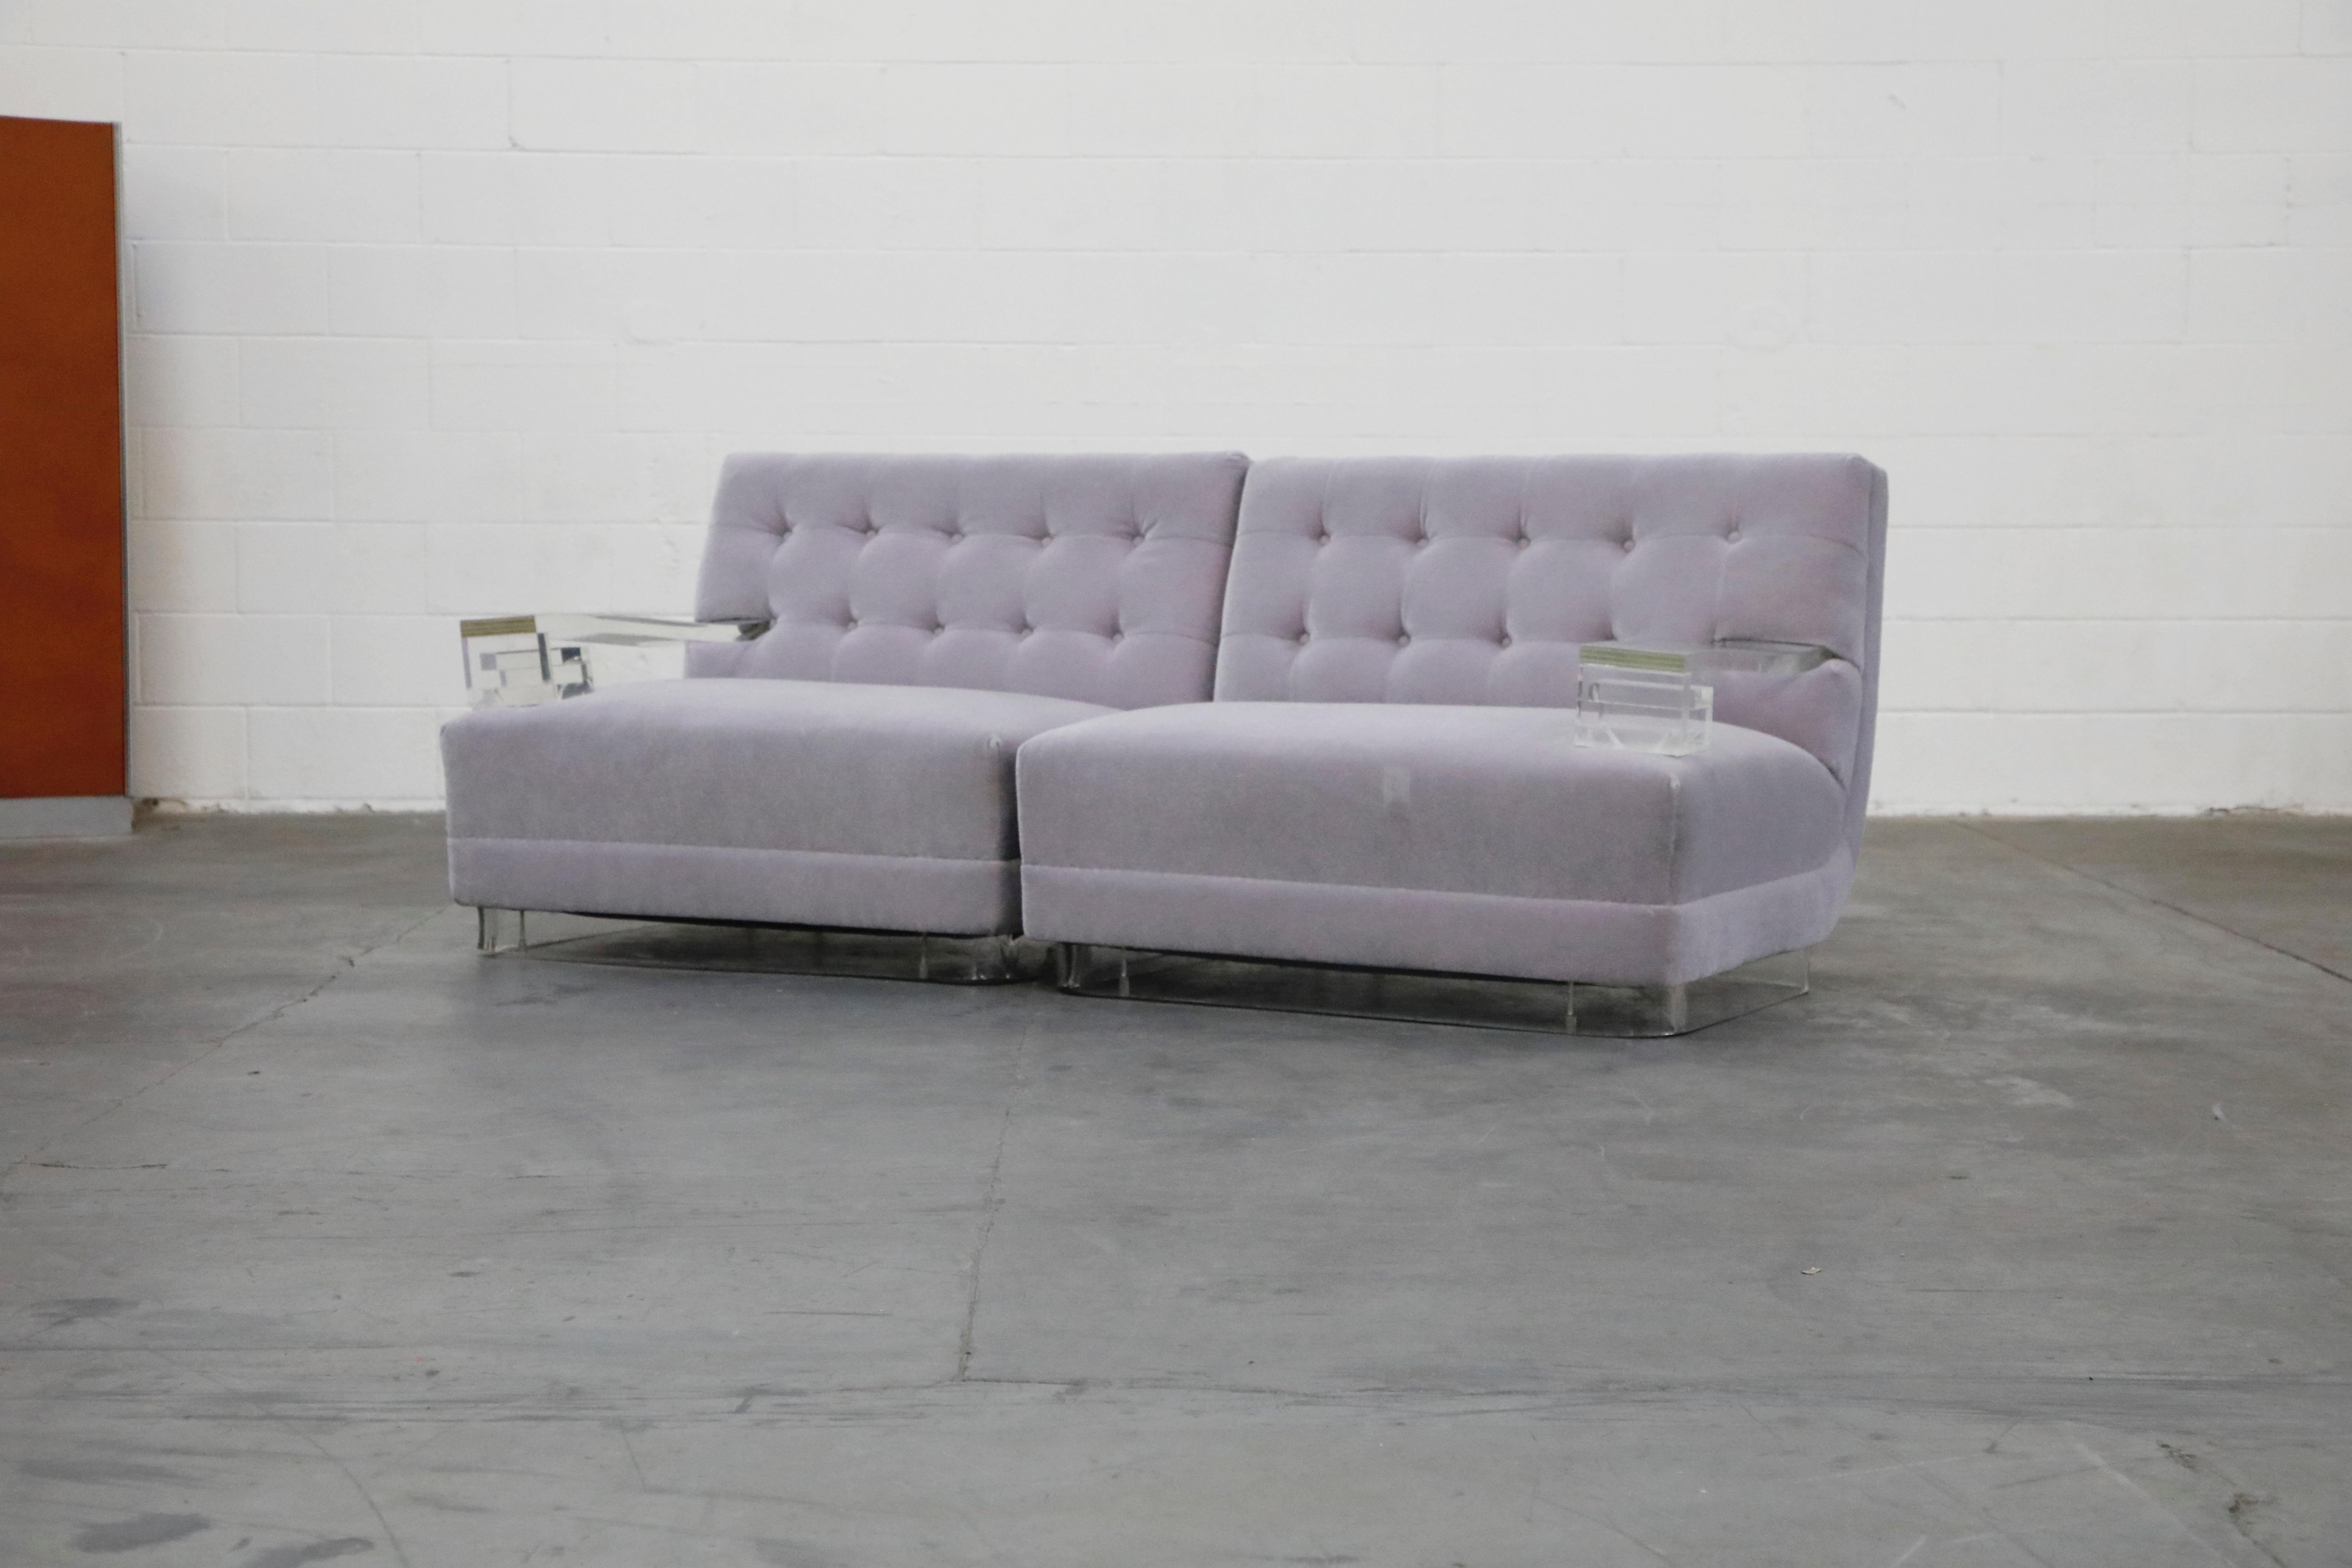 An amazing pair of reupholstered mohair 1960s club chairs, that when placed together create a loveseat, with Lucite Greek Key arms and base along with recently reupholstered lavender mohair. This Hollywood Regency pair of single-arm lounge chairs